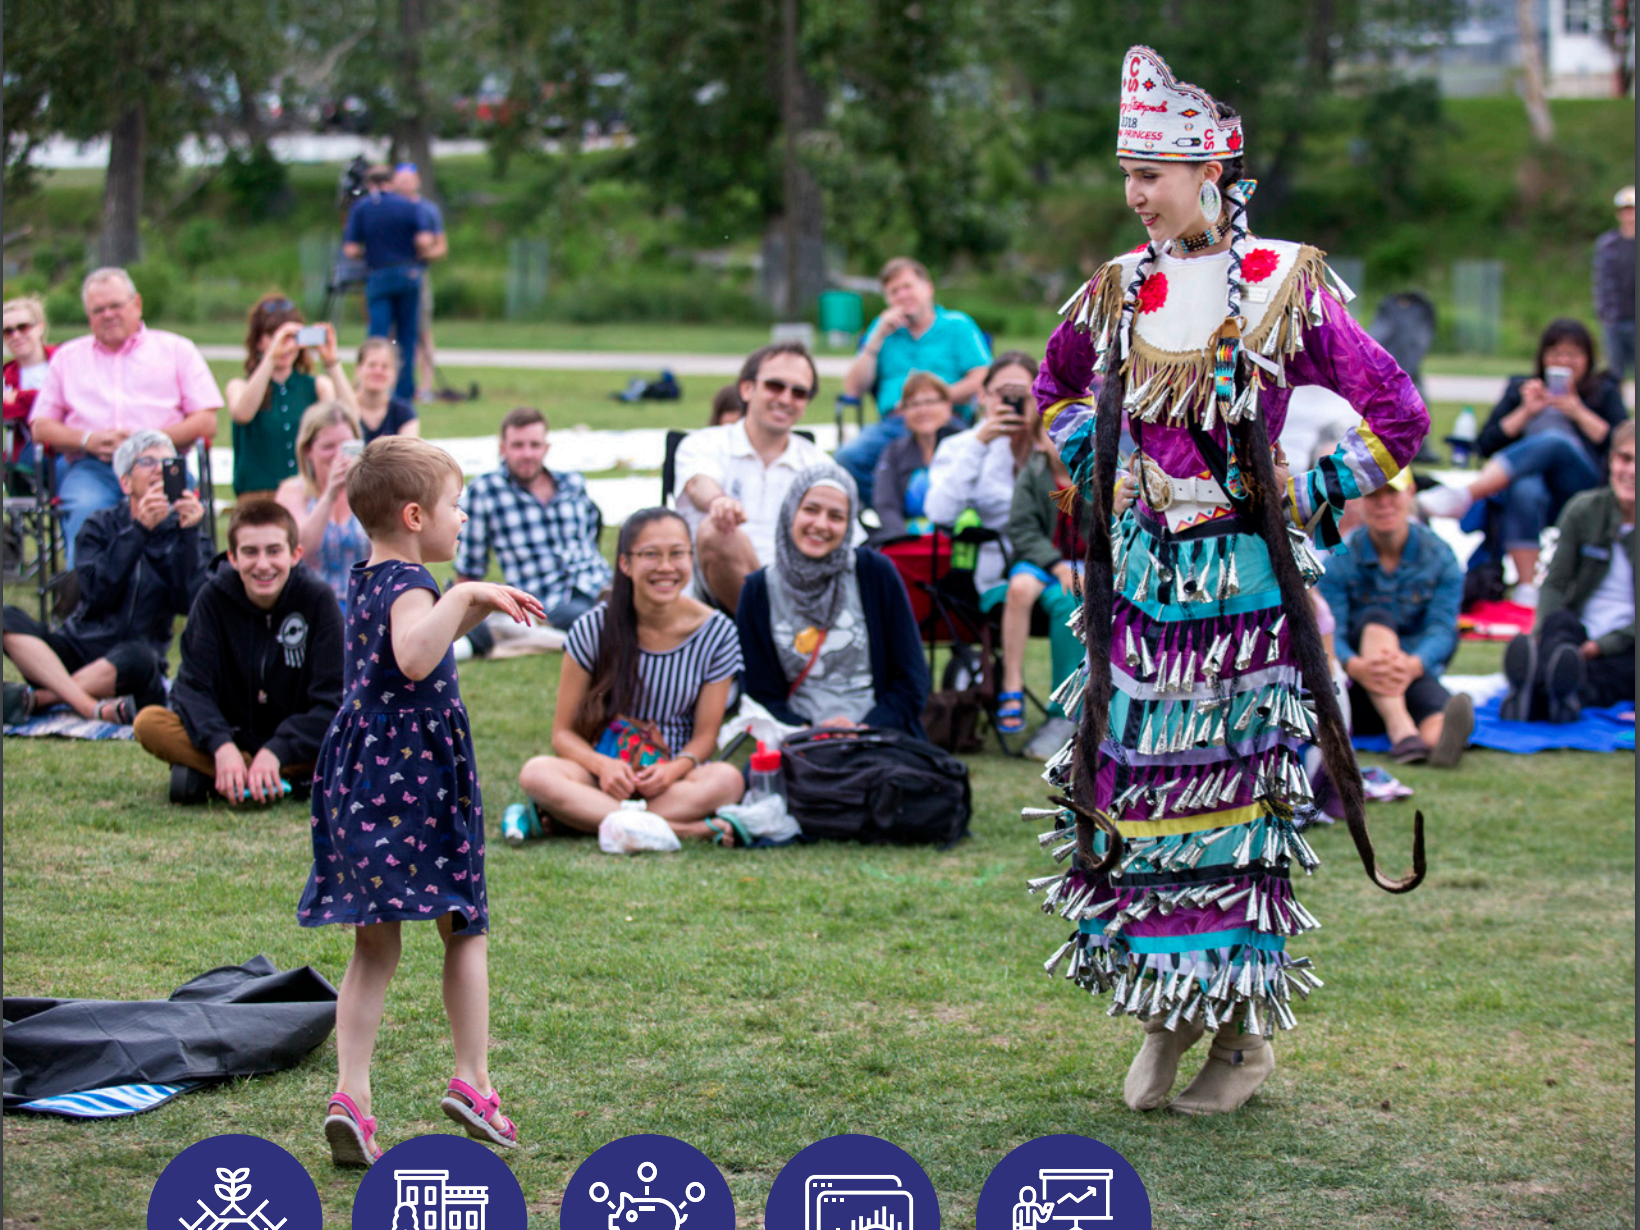 Woman in Indigenous regalia dancing with young caucasian girl in a park while others look on.